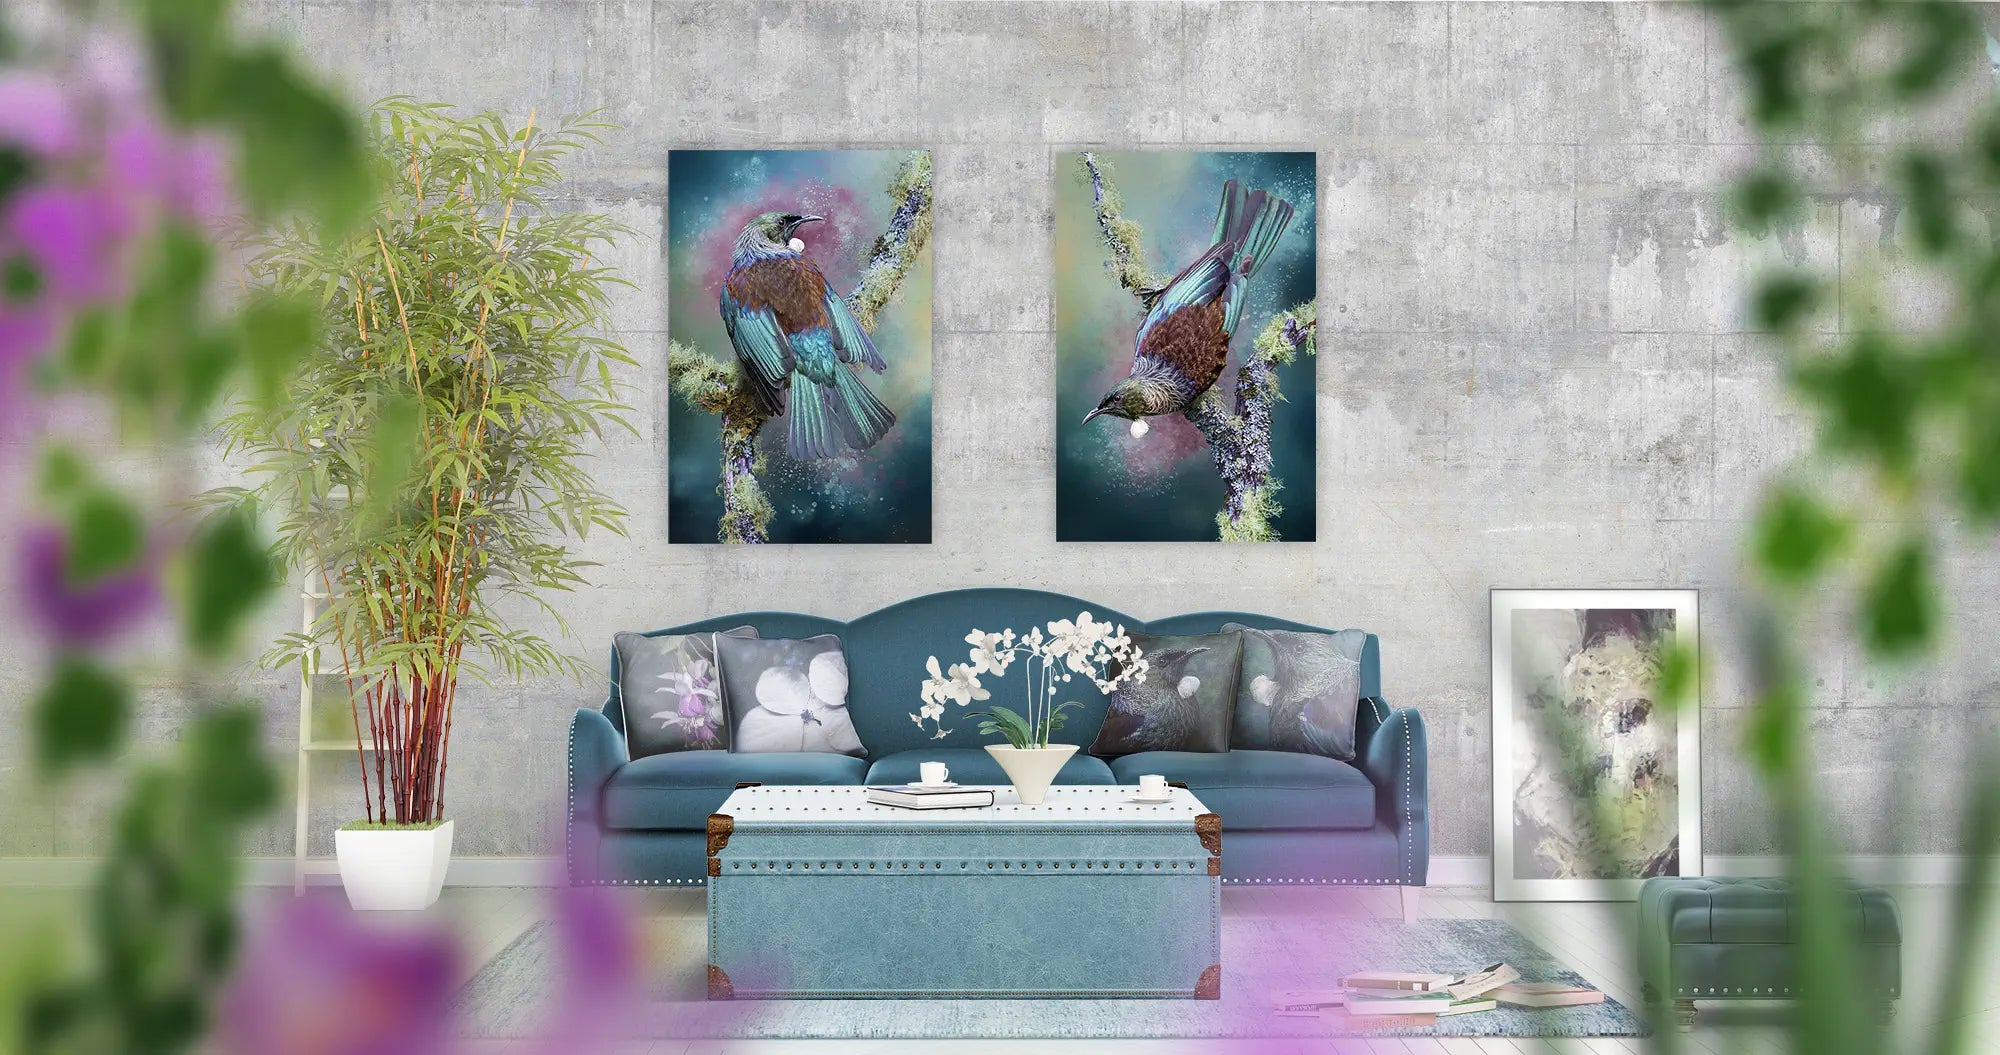 tui artworks in a living room, the tui are perched on lichened branches and are in hues of aqua and purple